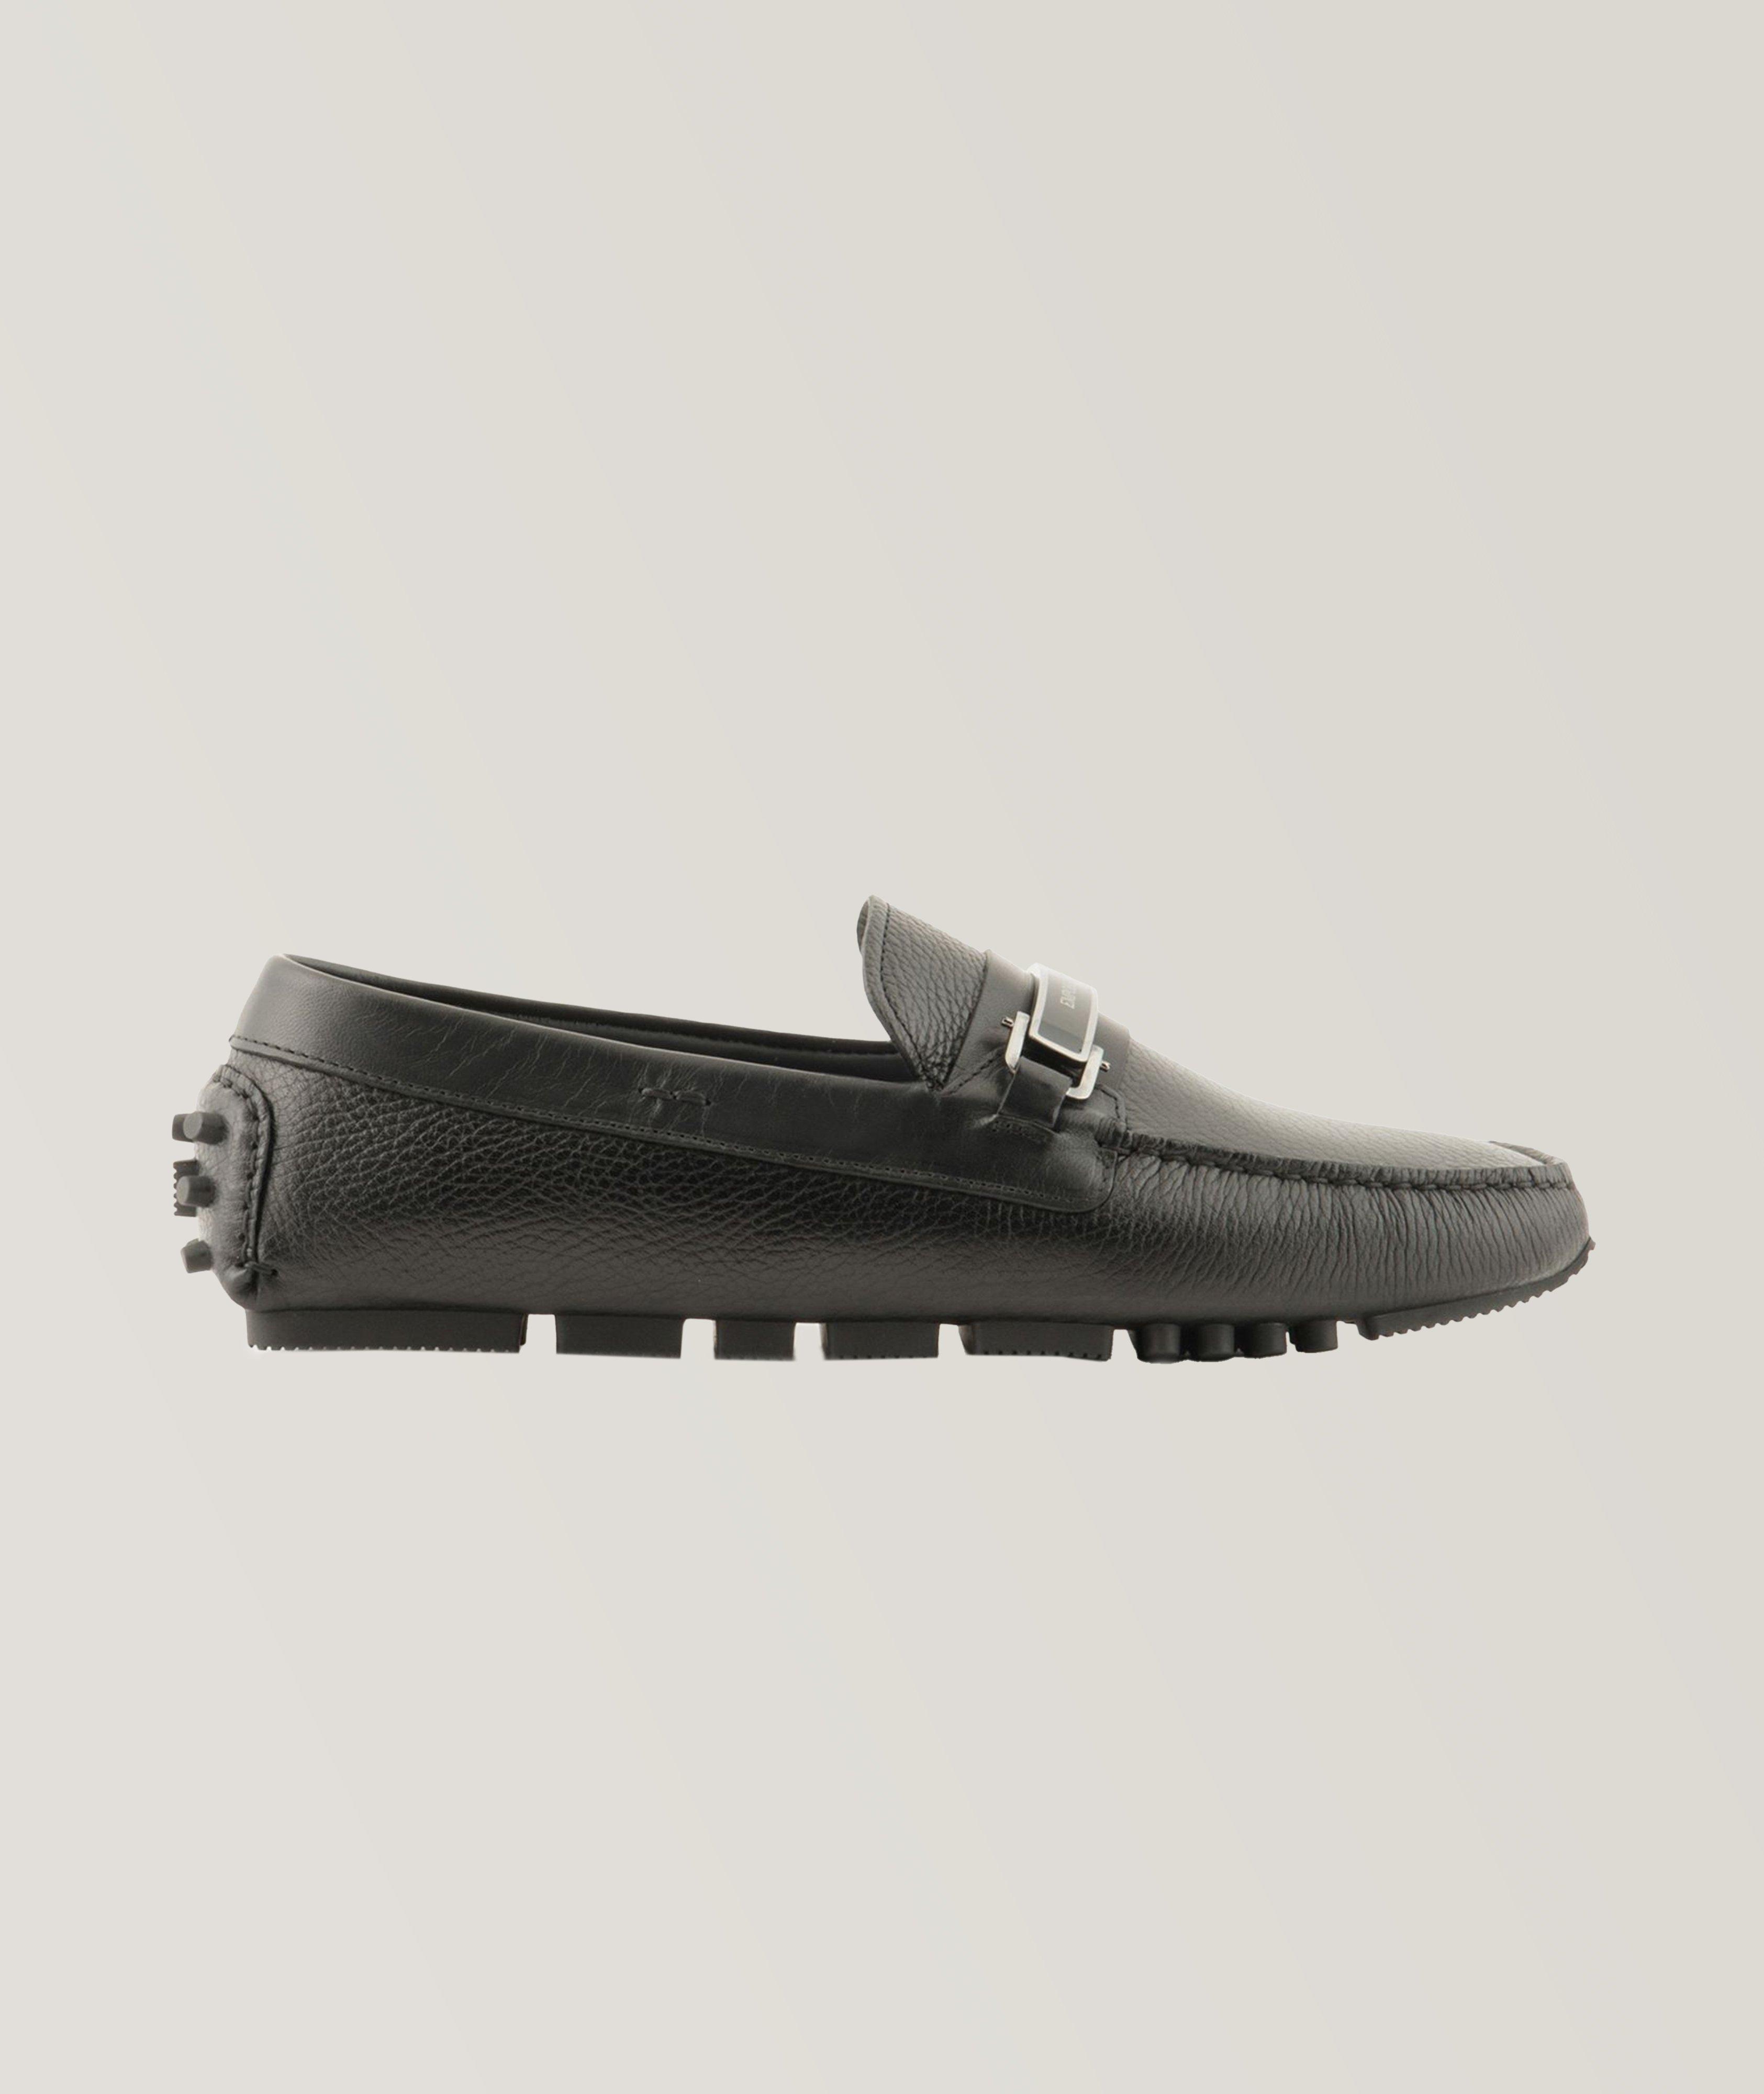 Emporio Armani Pebbled Leather Loafers